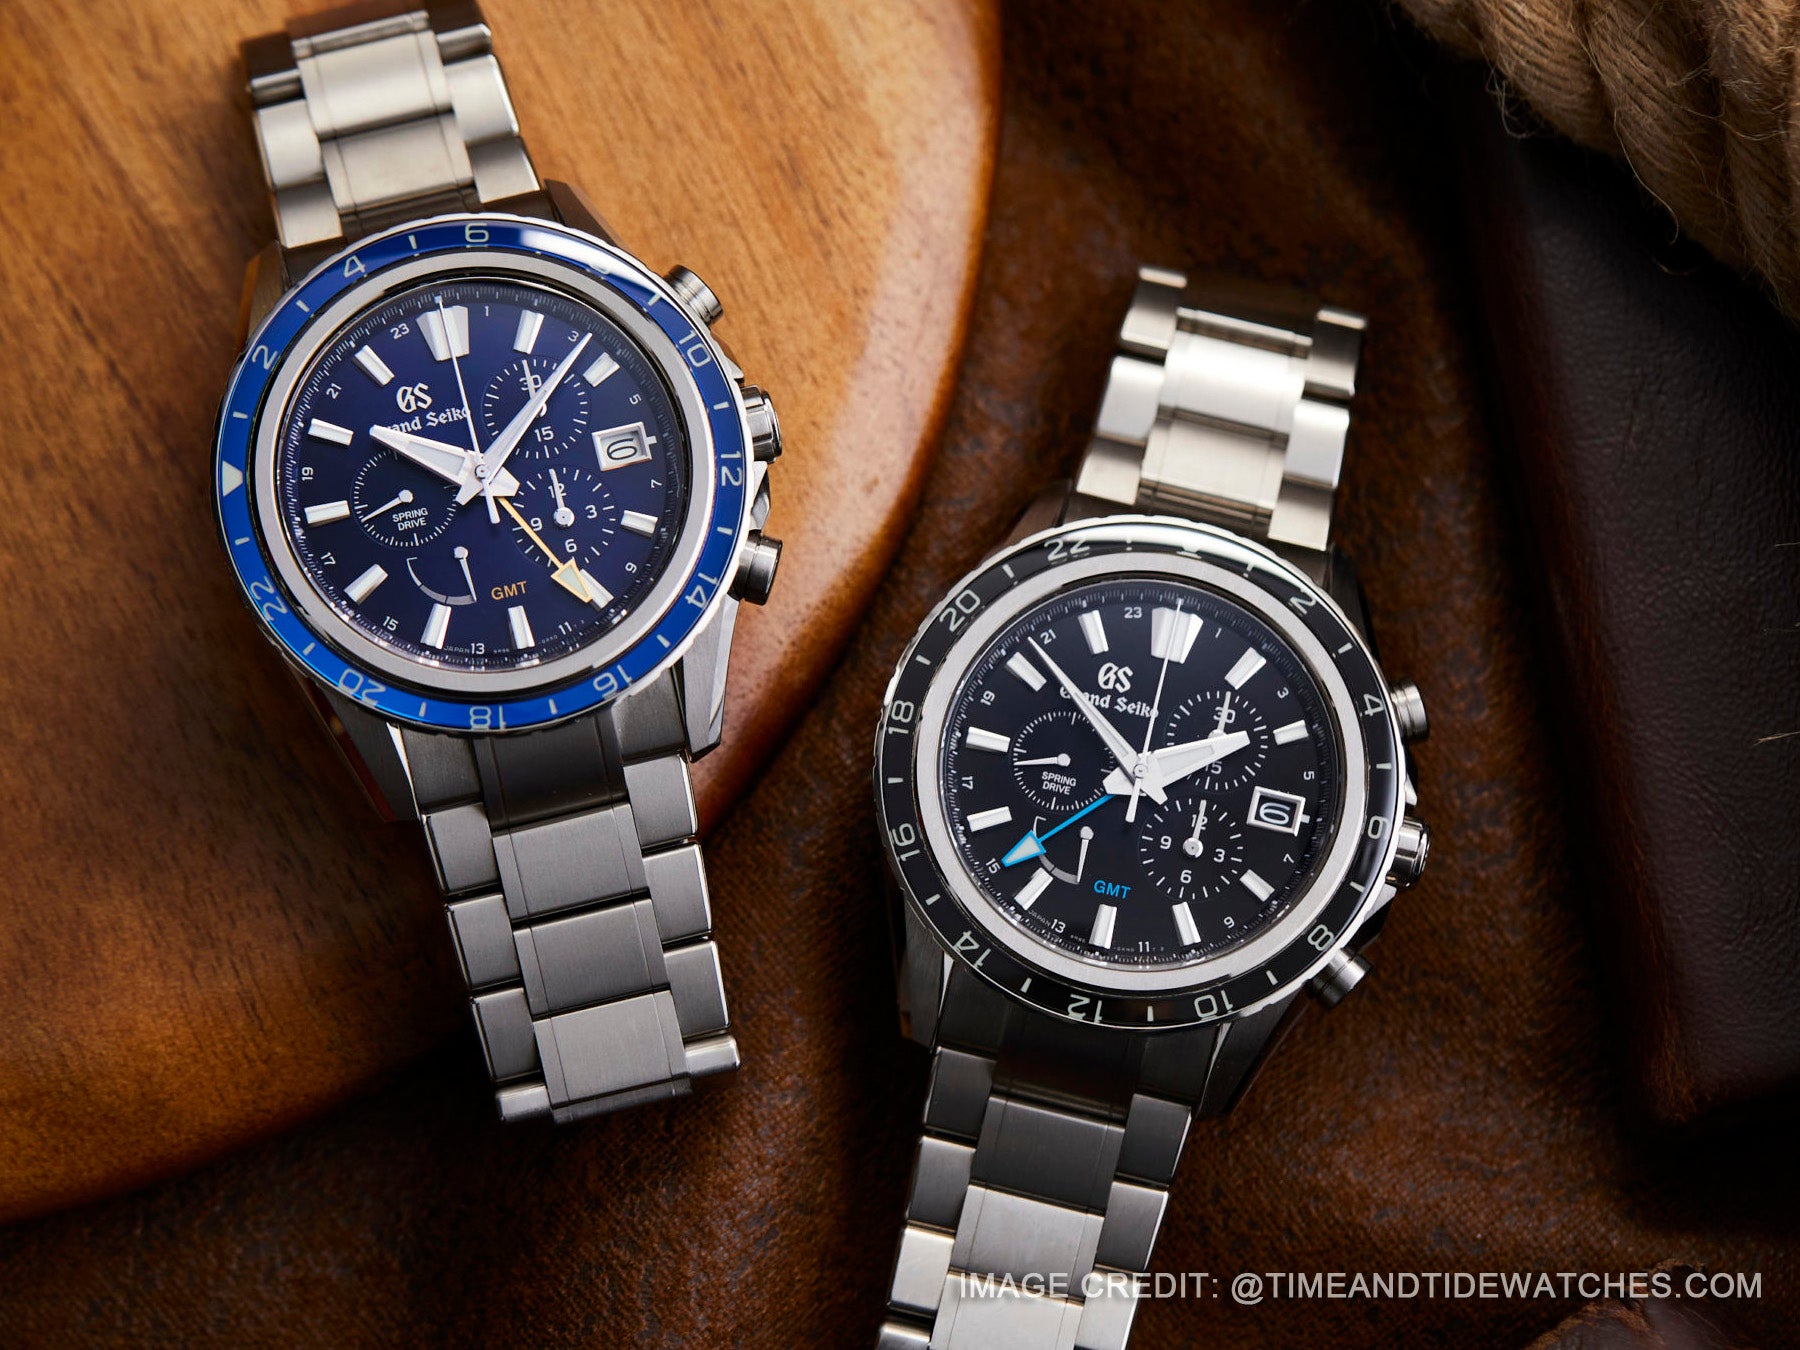 Our 4 Classic and Legendary SEIKO Chronographs Top Picks | Strapcode Watch  Bands